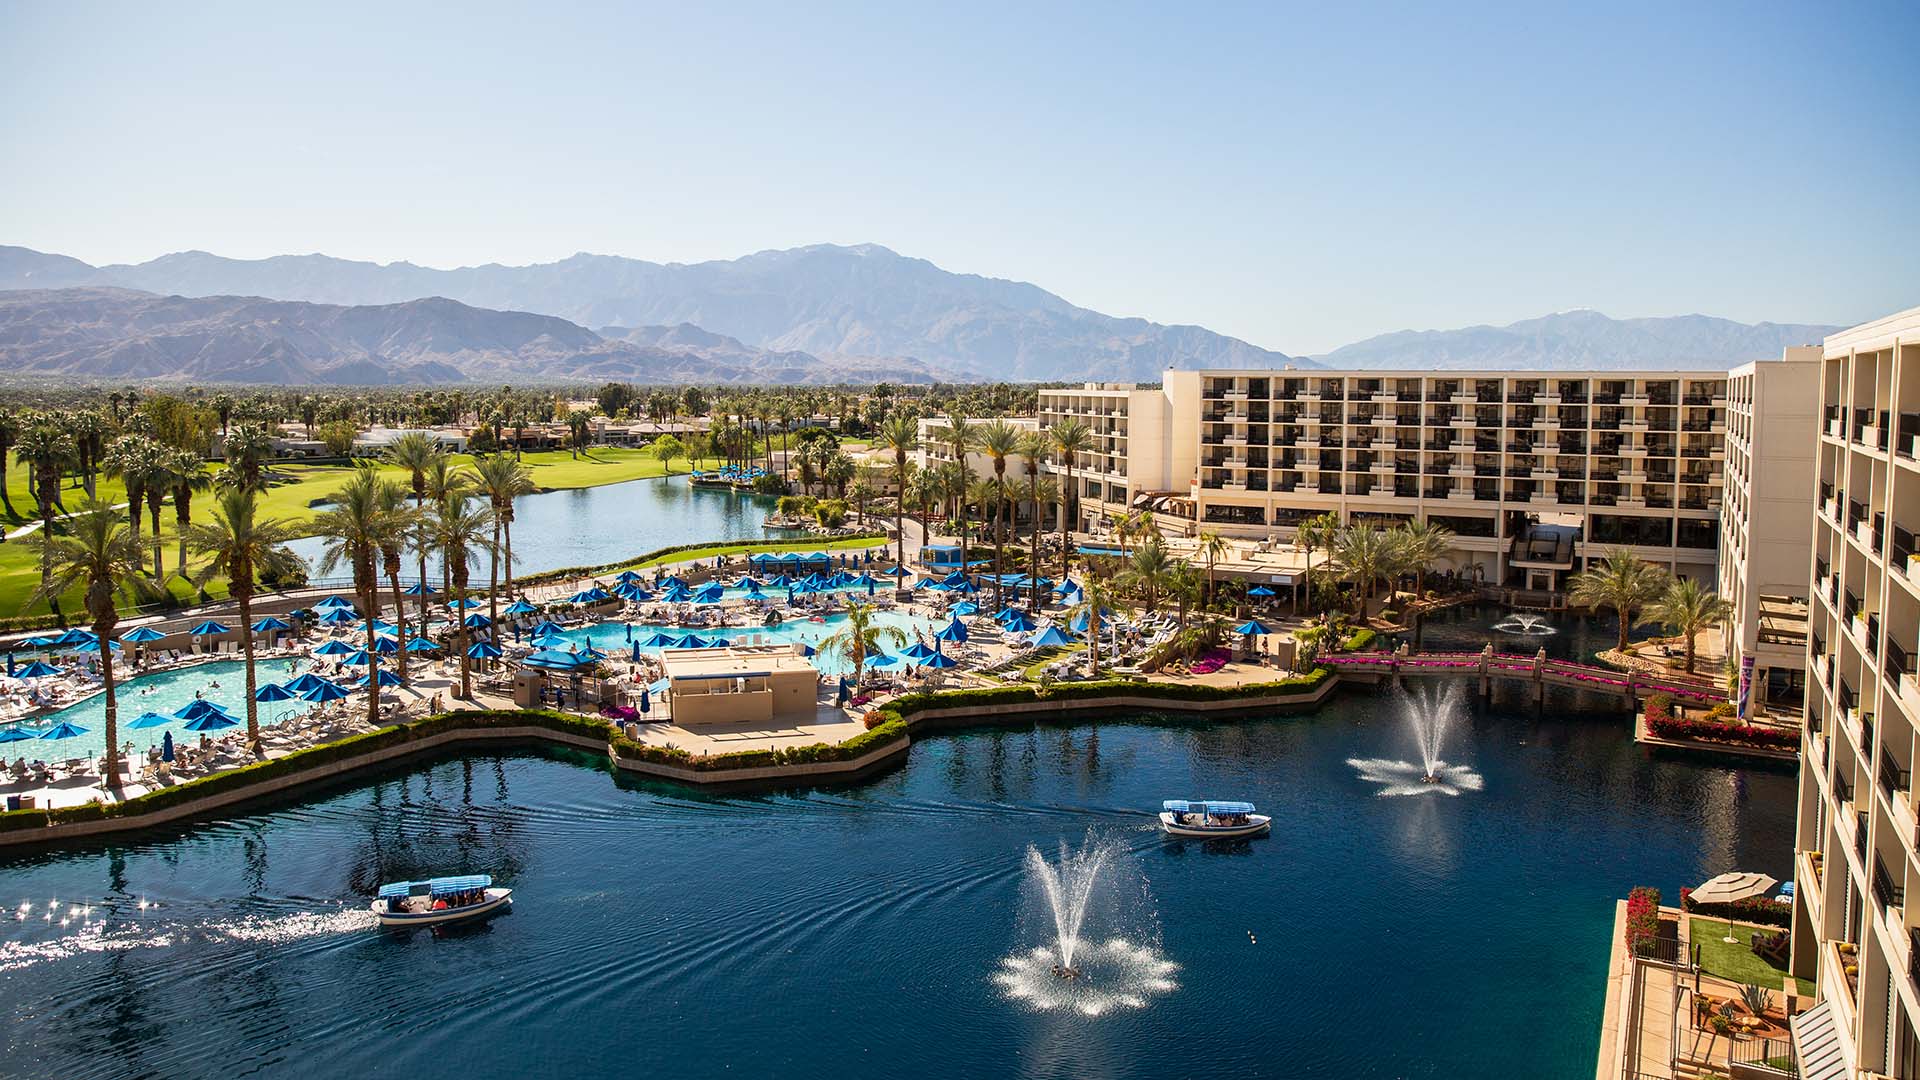 aerial view of swimming pools and other water features at JW Marriott Desert Springs Resort & Spa